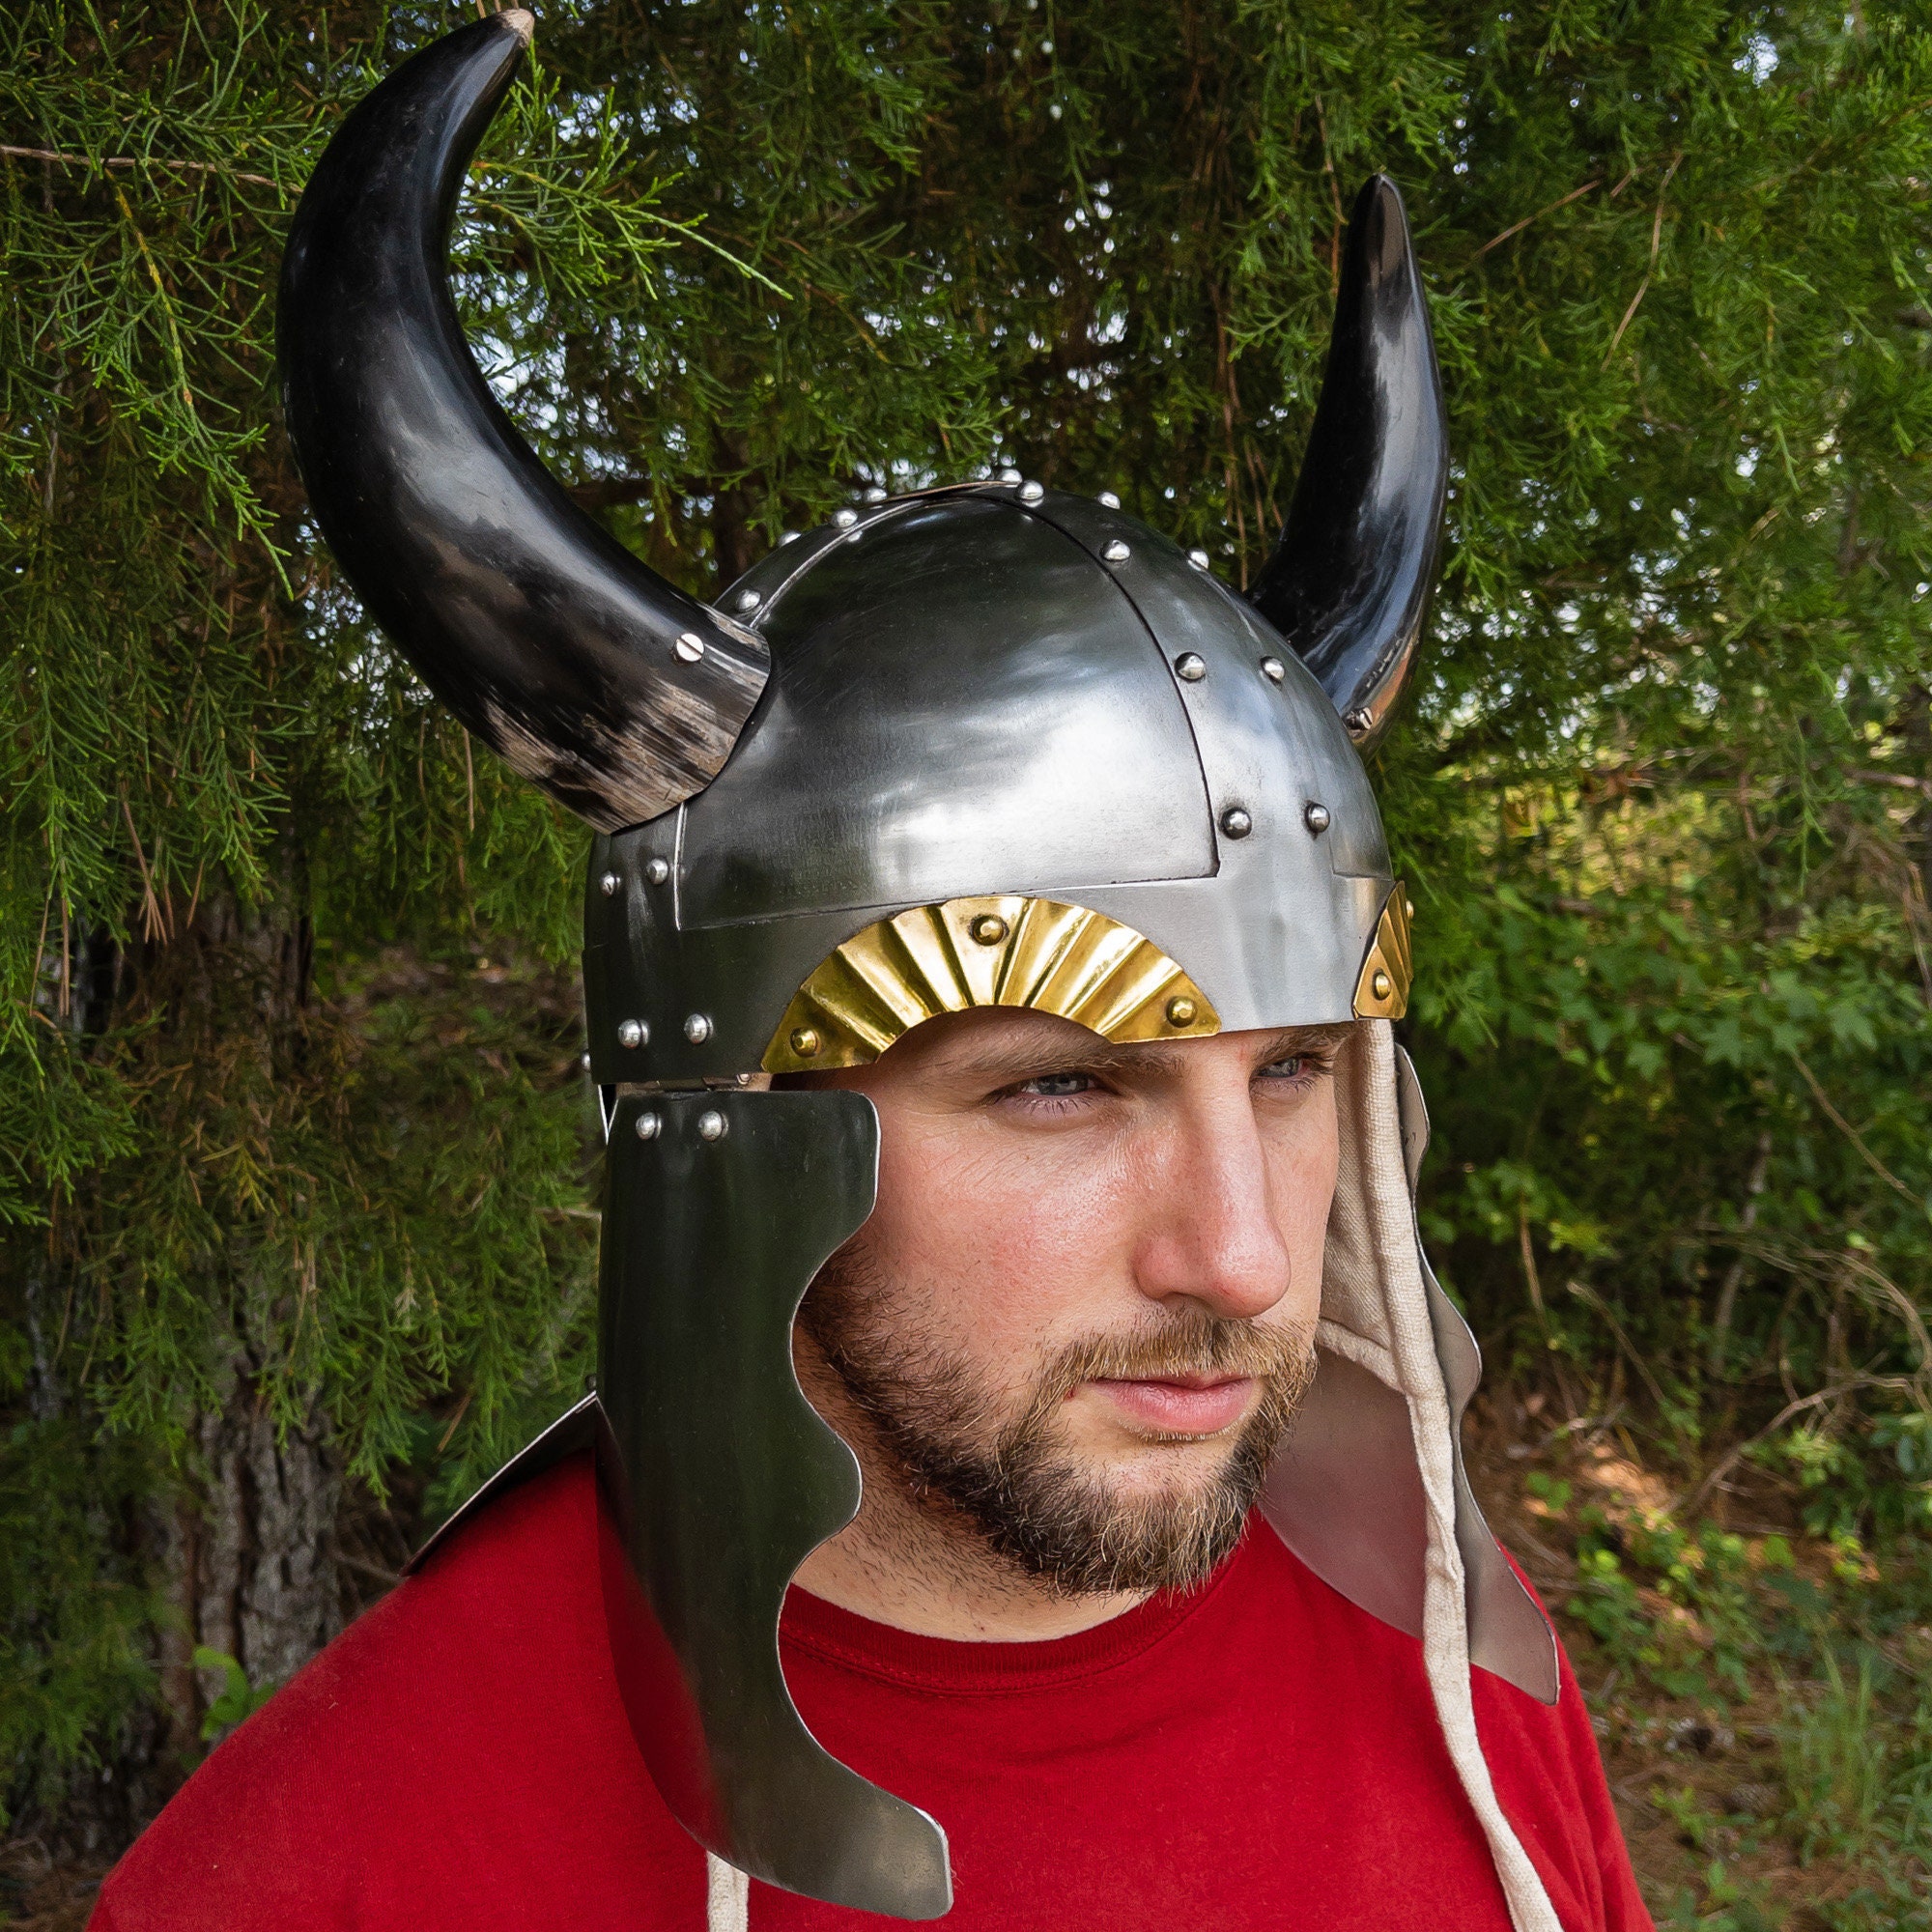 Authentic Viking Helmet With Real Horns